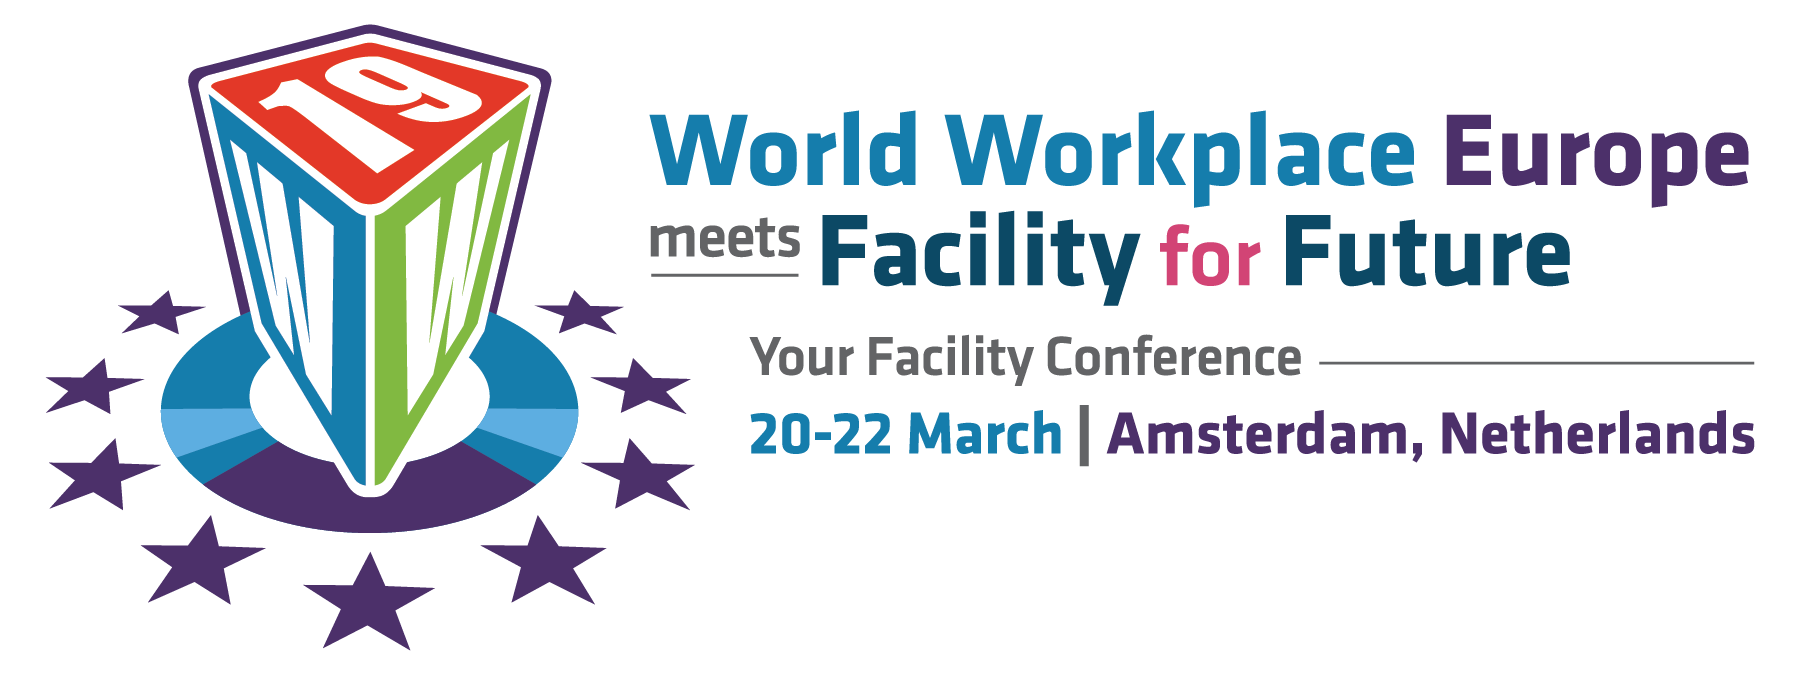 World Workplace Europe meets Facility for Future.